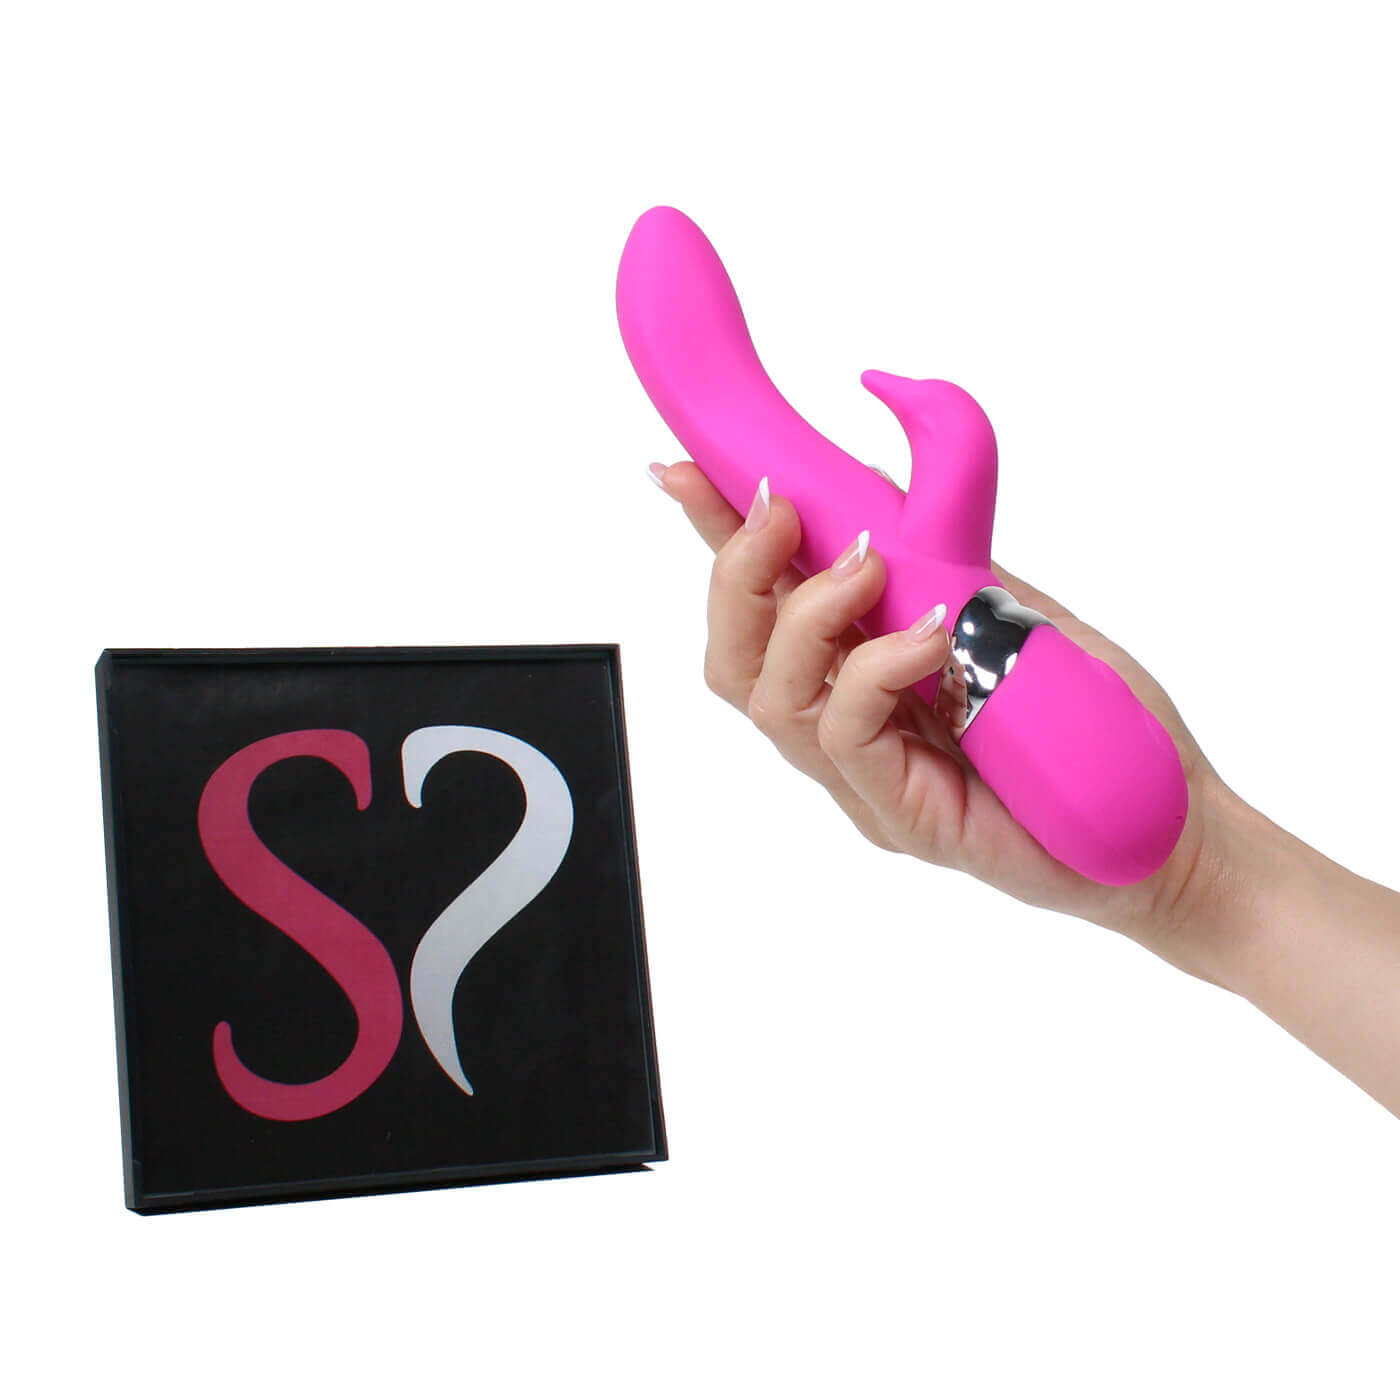 DUALITY 7 Function Dual Motor Rechargeable Powerful G-Spot Rabbit Vibrator